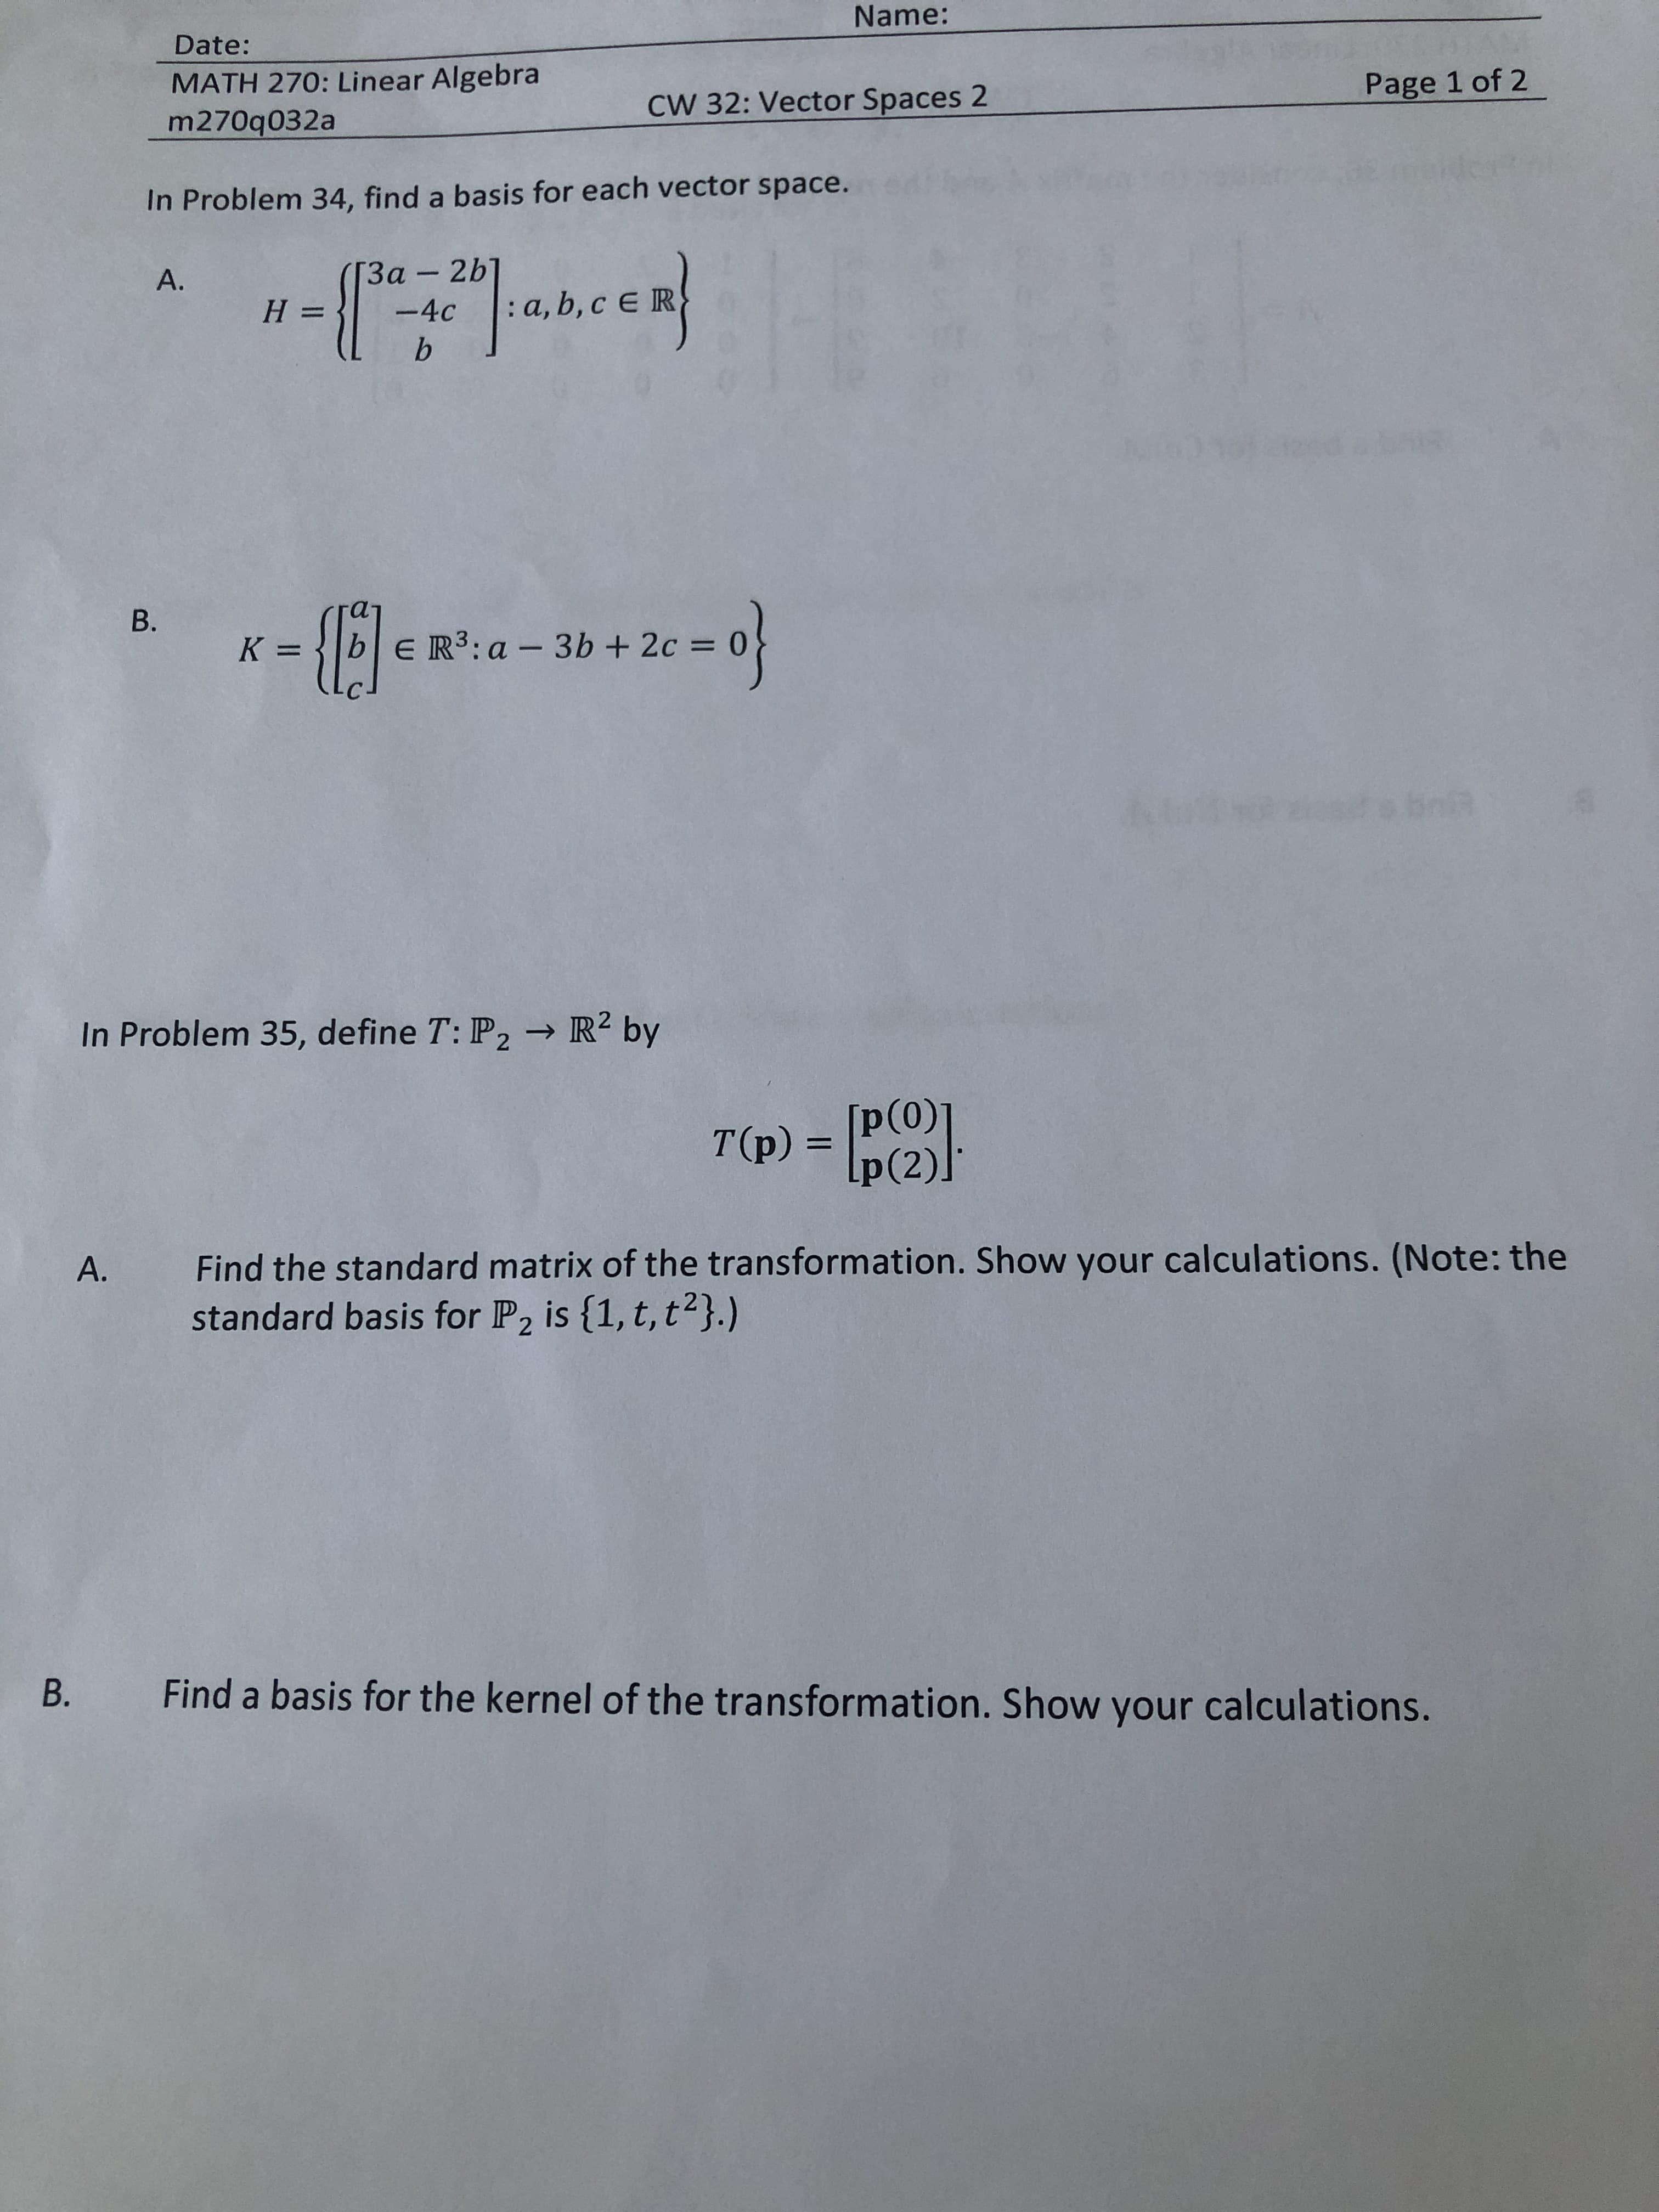 Name:
Date:
MATH 270: Linear Algebra
m270q032a
Page 1 of 2
CW 32: Vector Spaces 2
In Problem 34, find a basis for each vector space.
heen
3α-2b]
-4c a, b, c E R
A.
H =
b
B.
K =|b
E R3:a
3b + 2c=
useobrin
In Problem 35, define T: P2R2 by
p(0)]
T(p) = Ip(2)
Find the standard matrix of the transformation. Show your calculations. (Note: the
standard basis for P2 is {1, t, t2}.)
A.
Find a basis for the kernel of the transformation. Show your calculations.
B.
